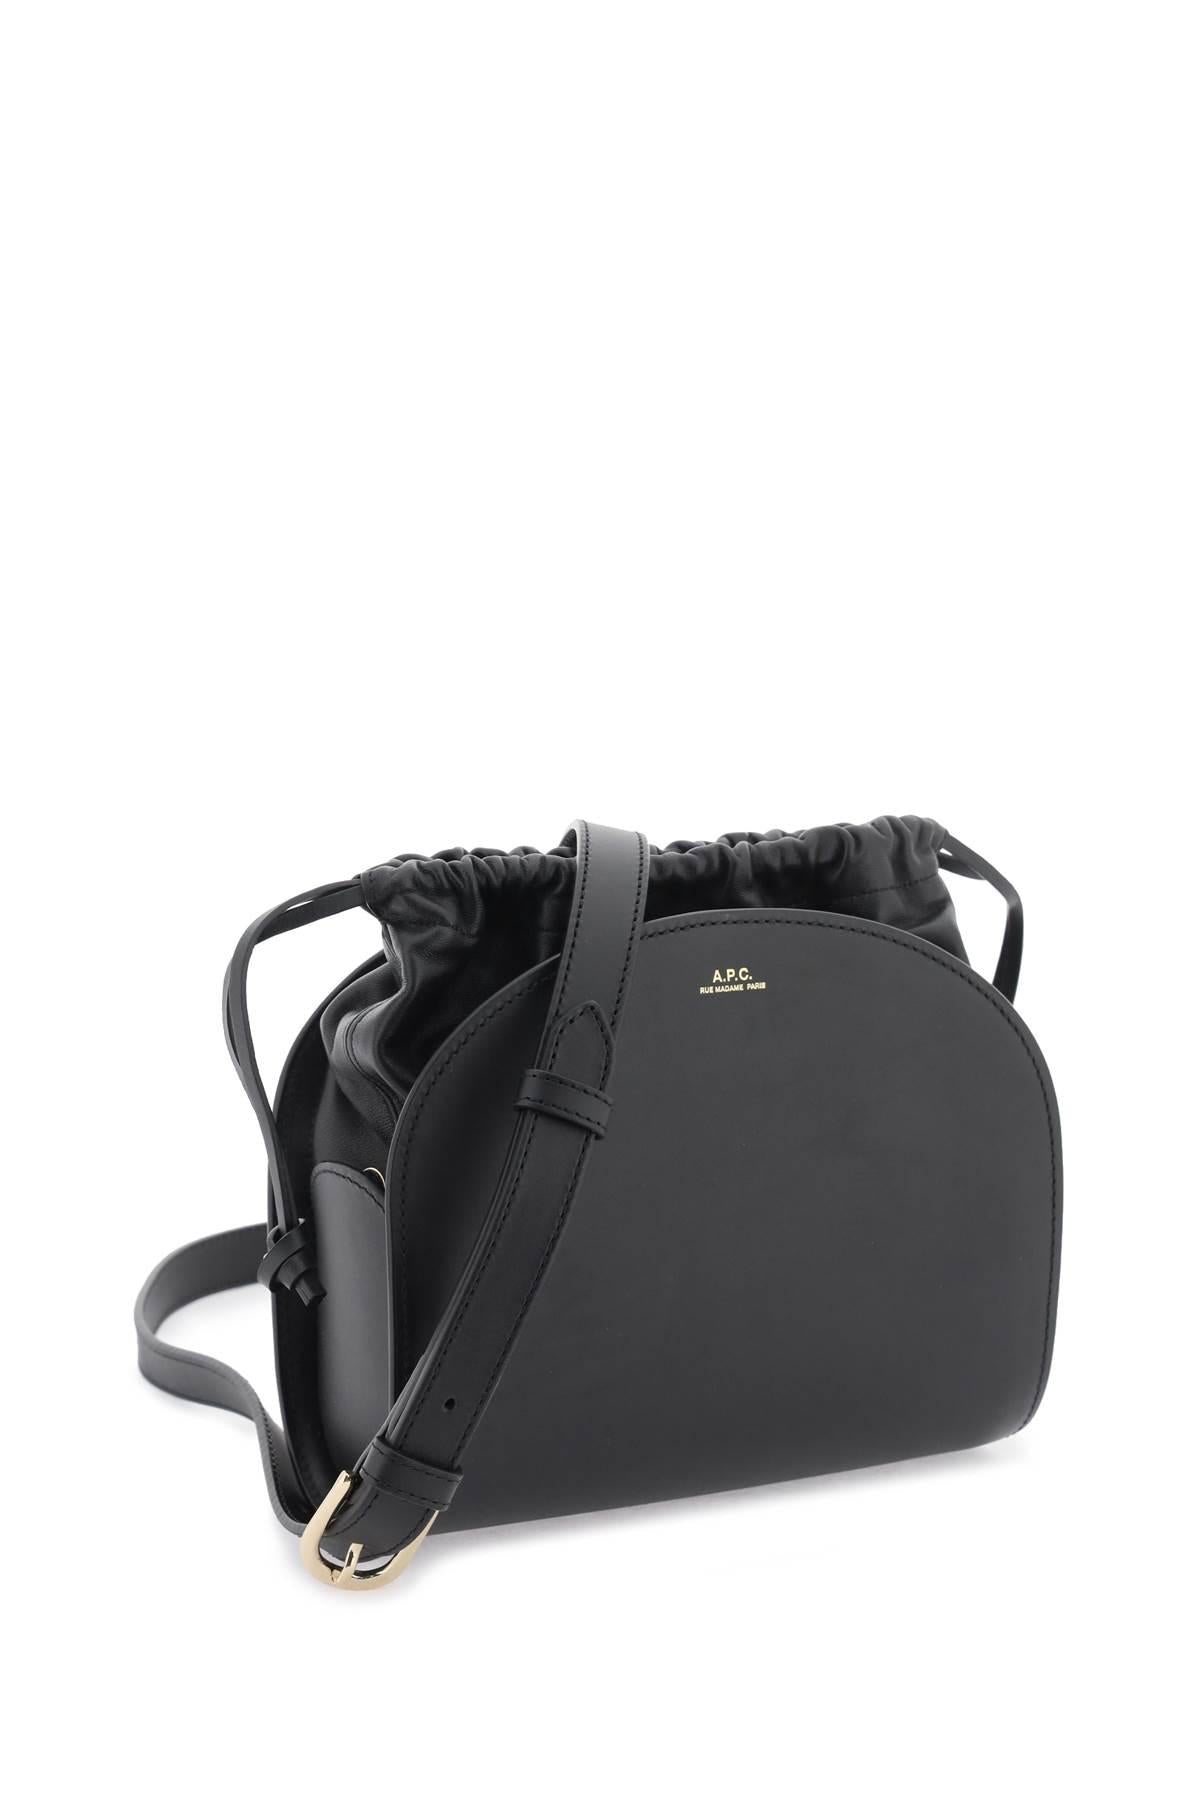 A.P.C's Demi Lune is the Designer Bag I Carry All the Time